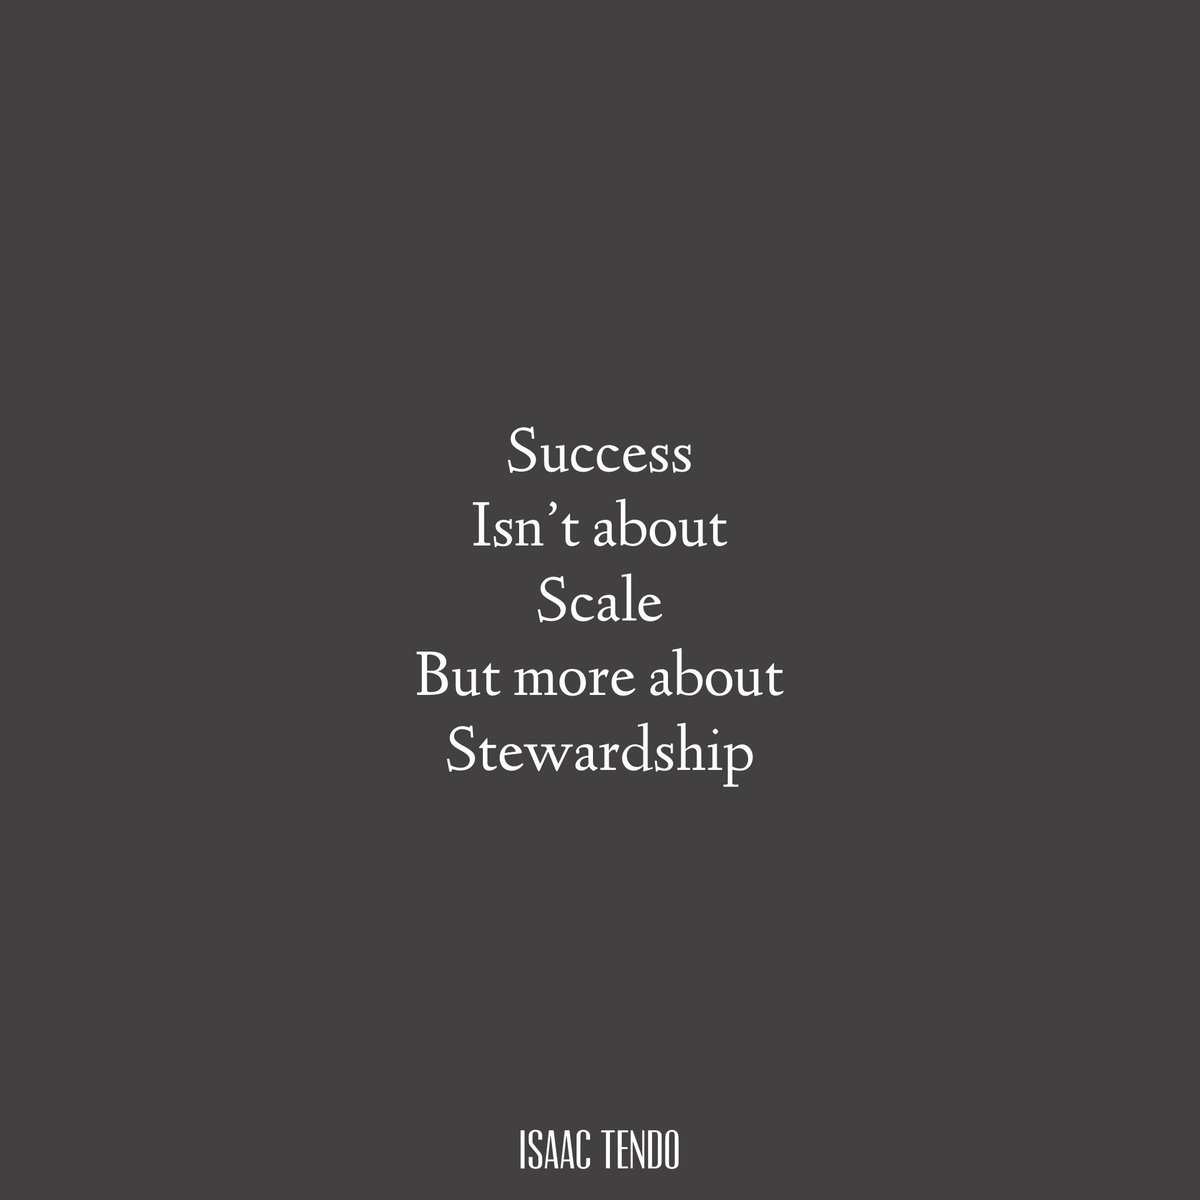 If you are faithful with what you have, even if you have a little, you are winning because success isn’t about scale but about stewardship. How are you using what you have? #startwithwhatyouhave